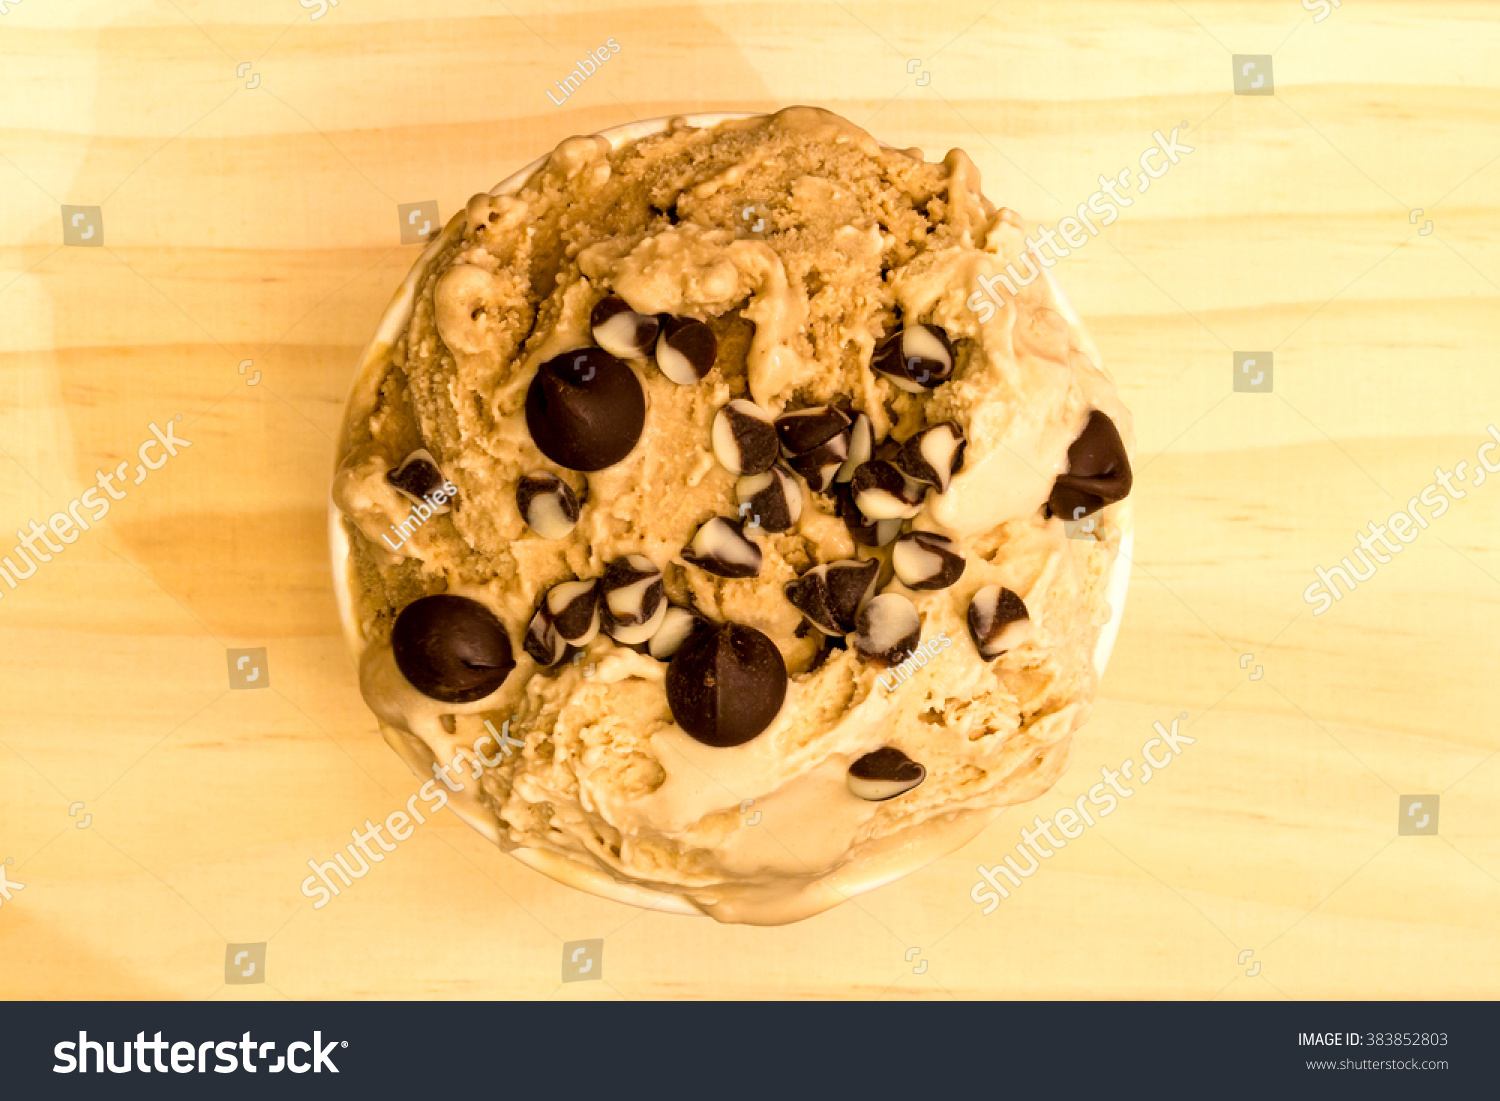 top view of coffee flavor icecream with topping with chocolate chips on the soft wooden background #383852803